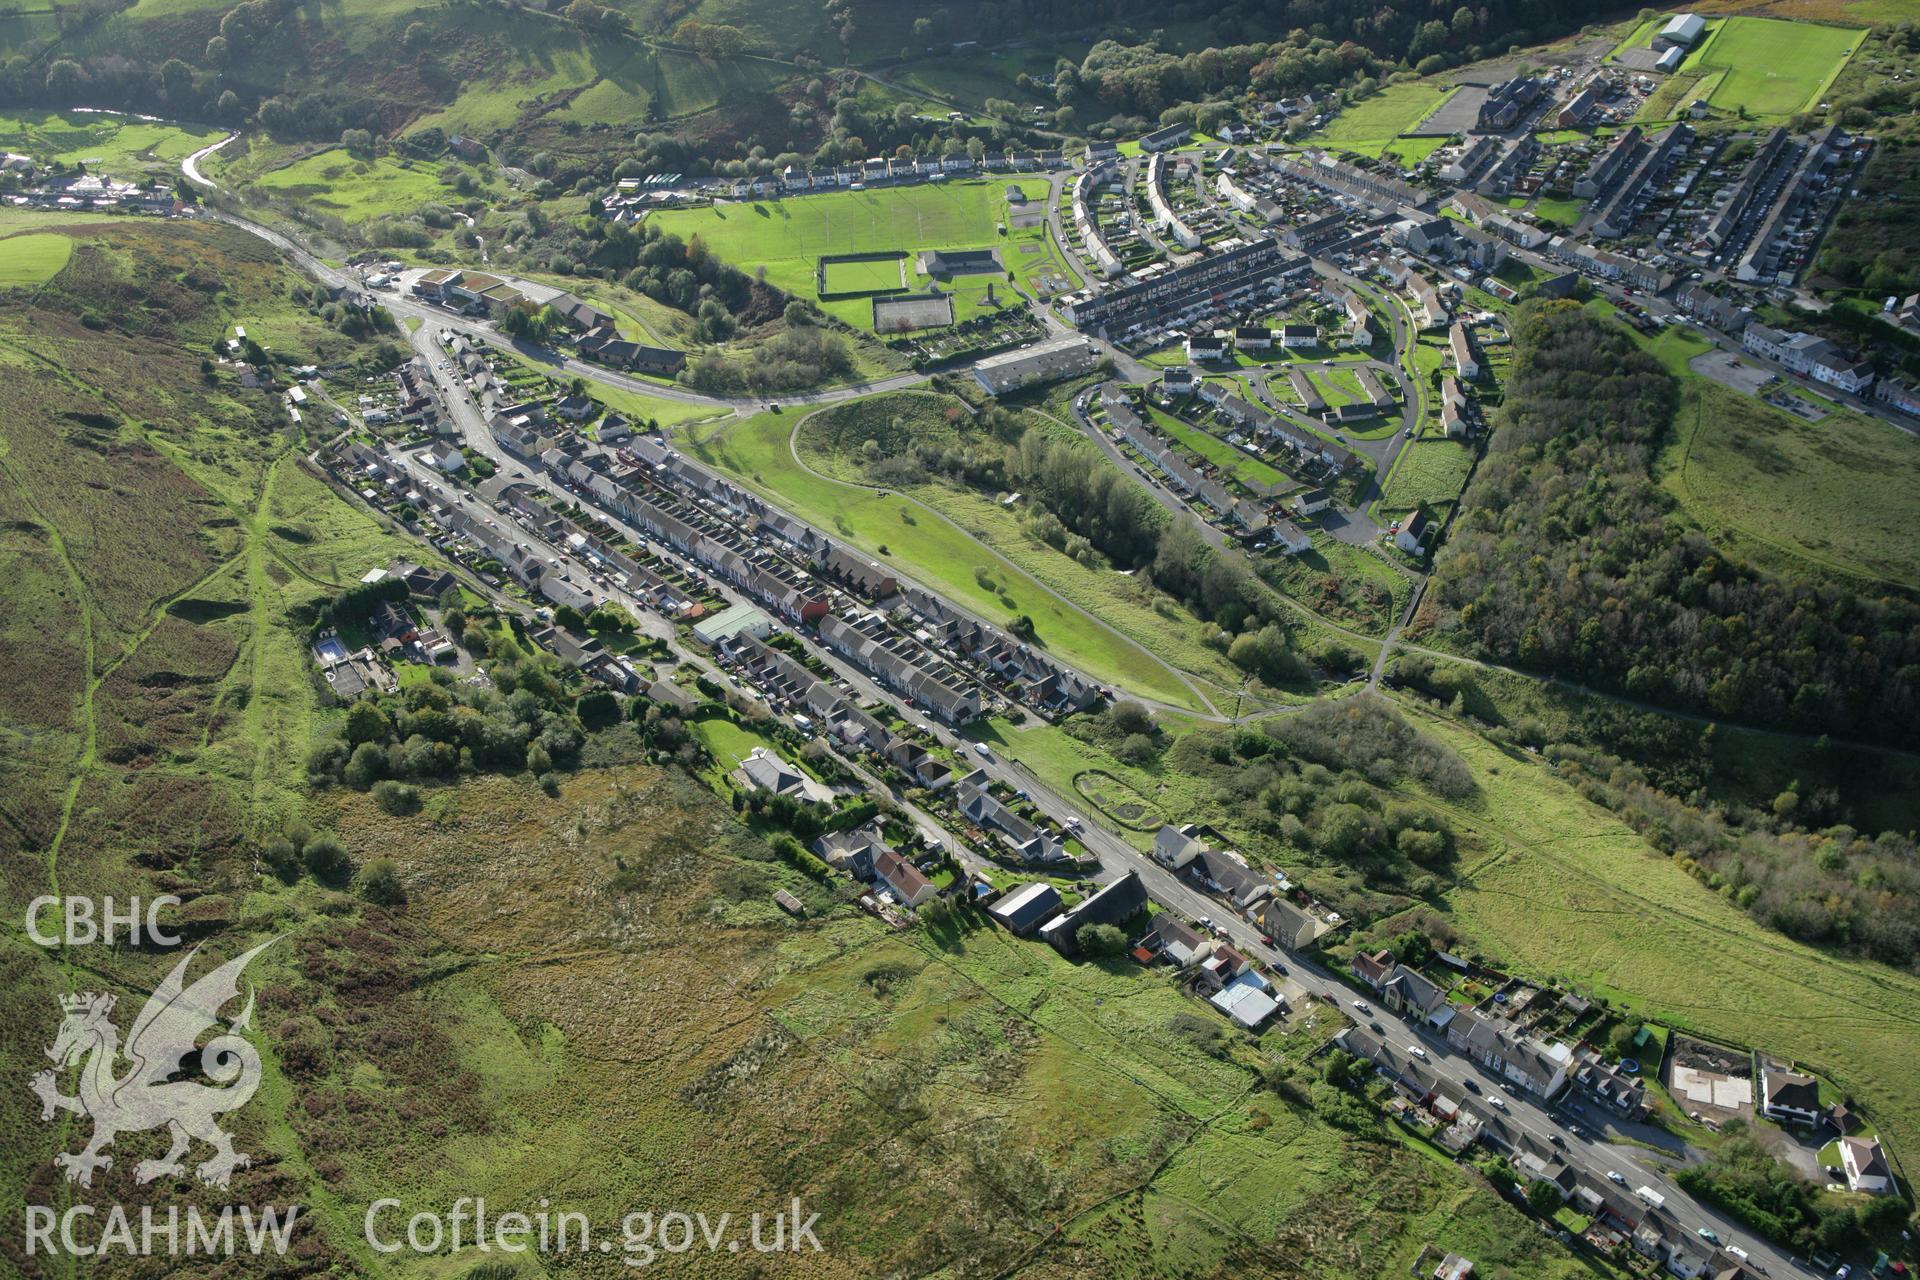 RCAHMW colour oblique photograph of Gilfach Goch townscape. Taken by Toby Driver on 16/10/2008.